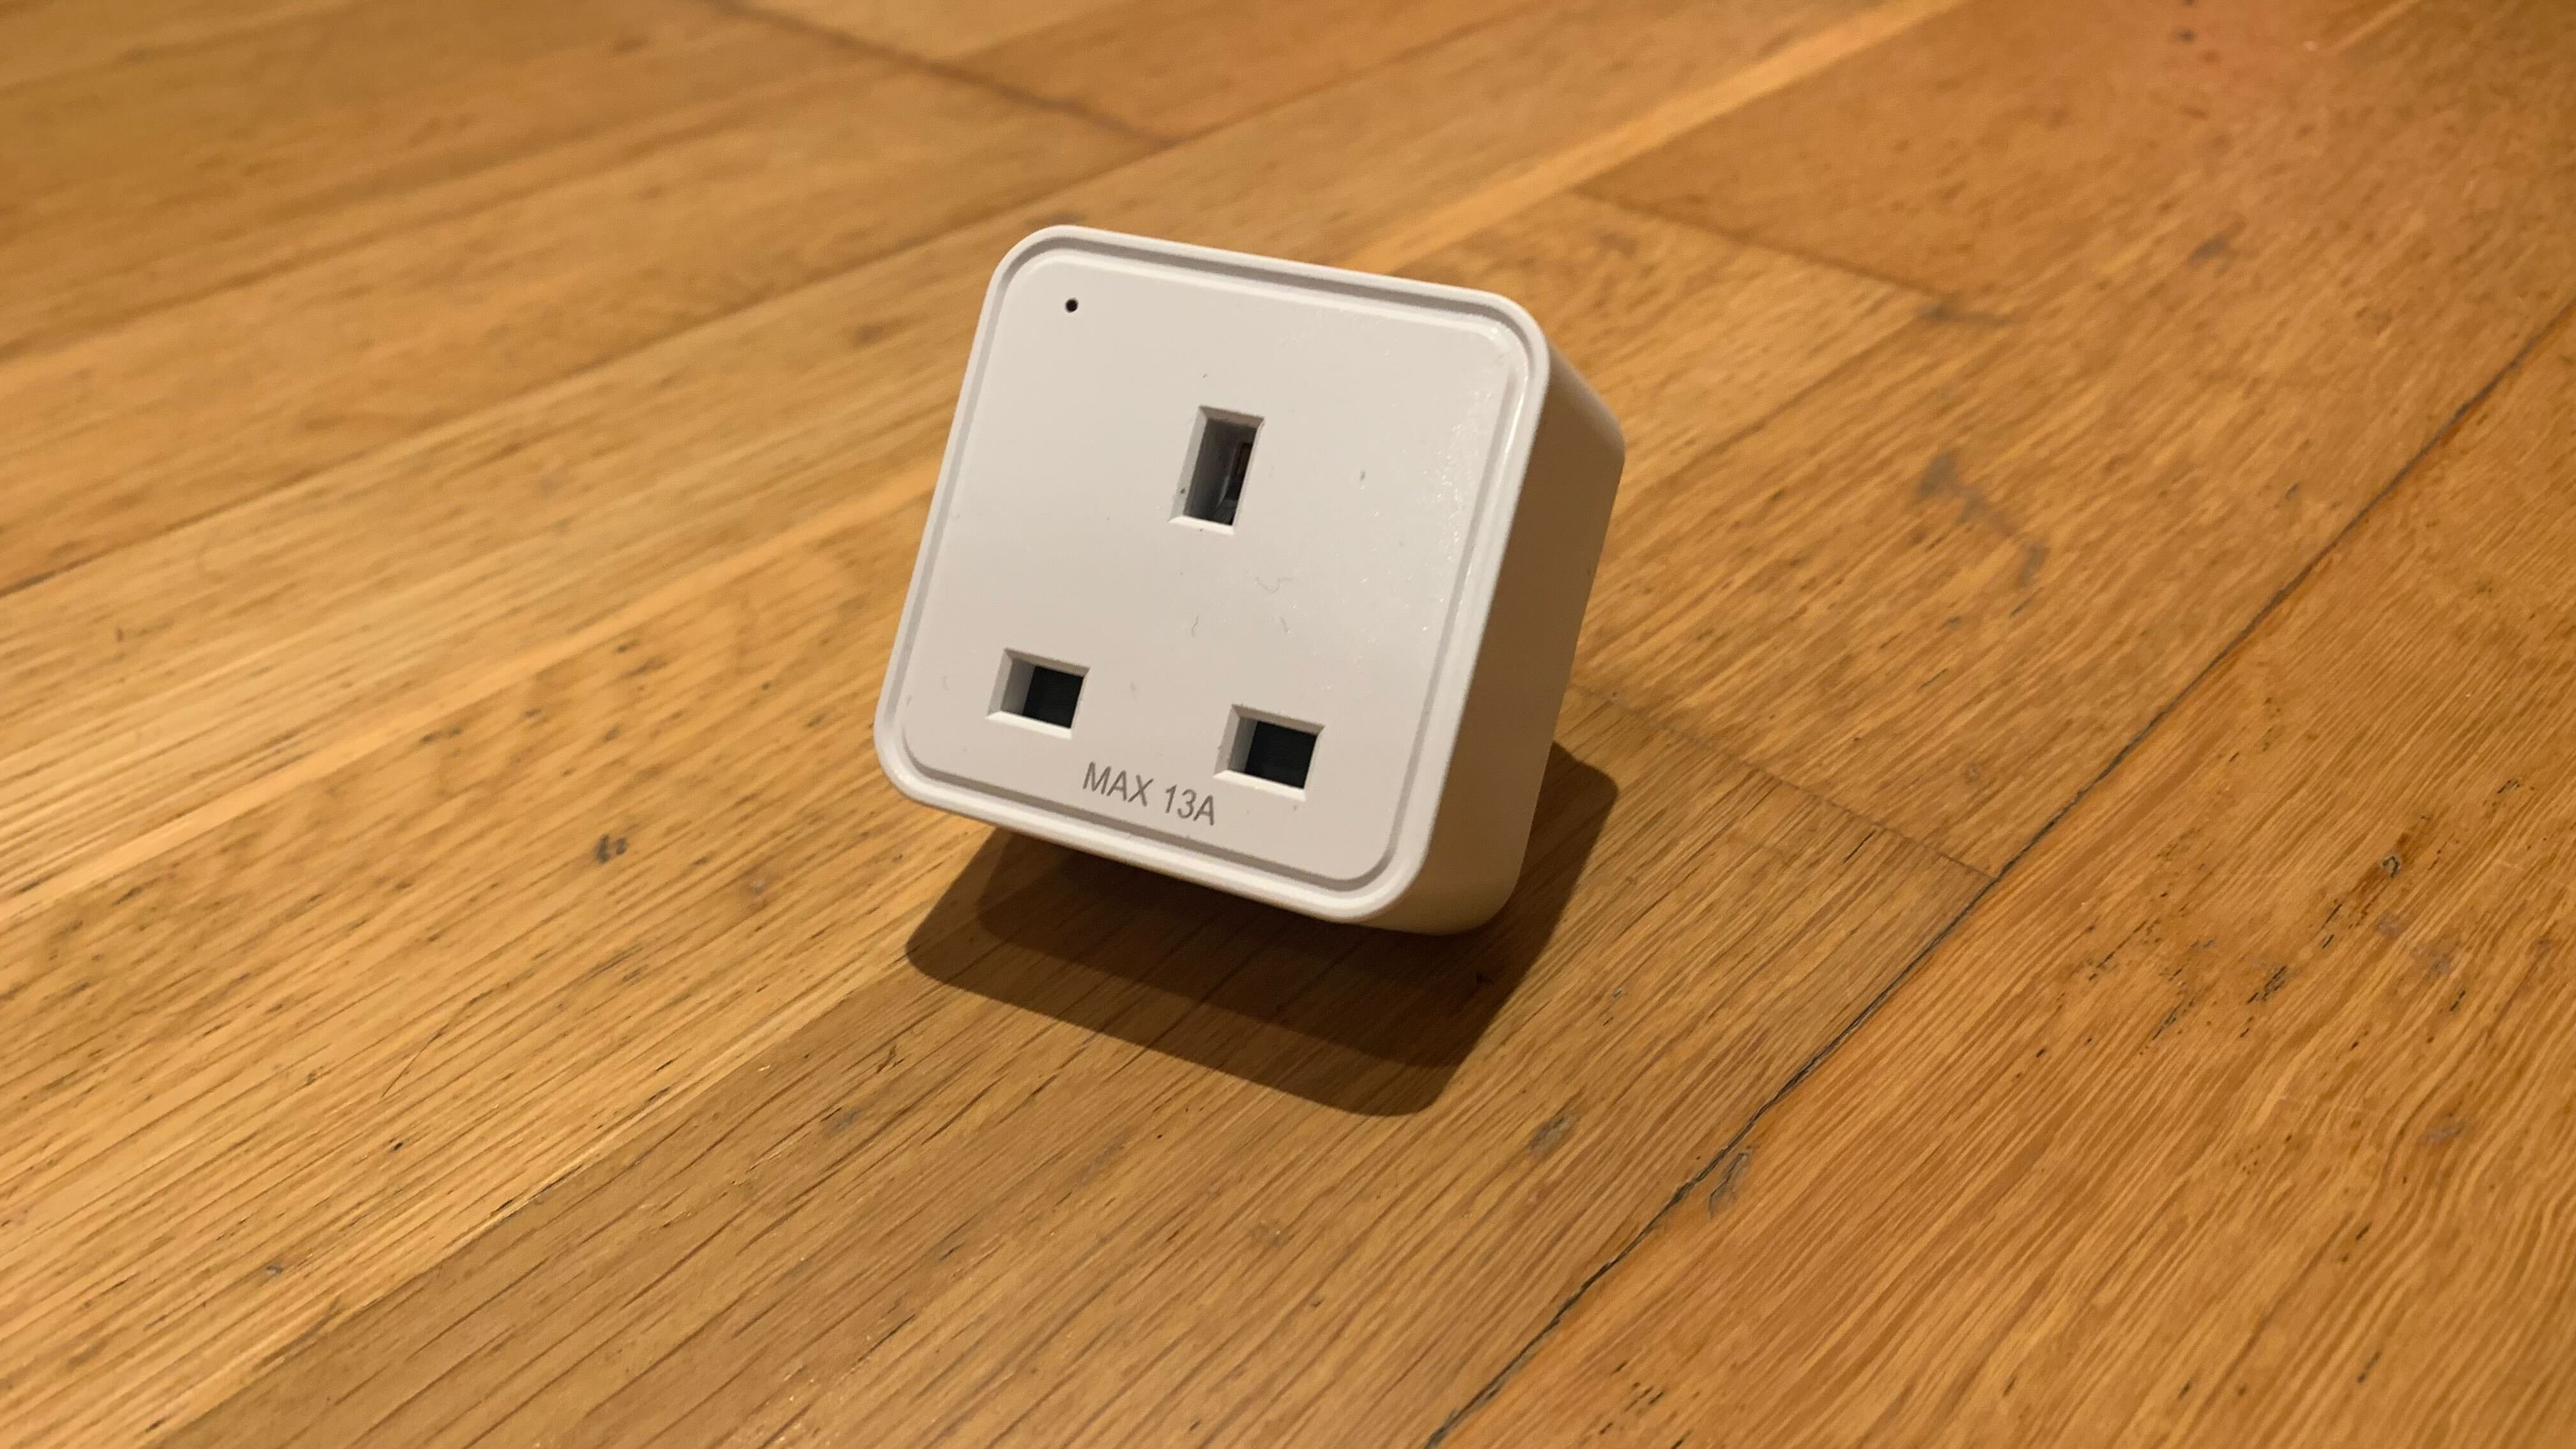 Philips Hue Smart Plug review: Just the basics, except for the price tag